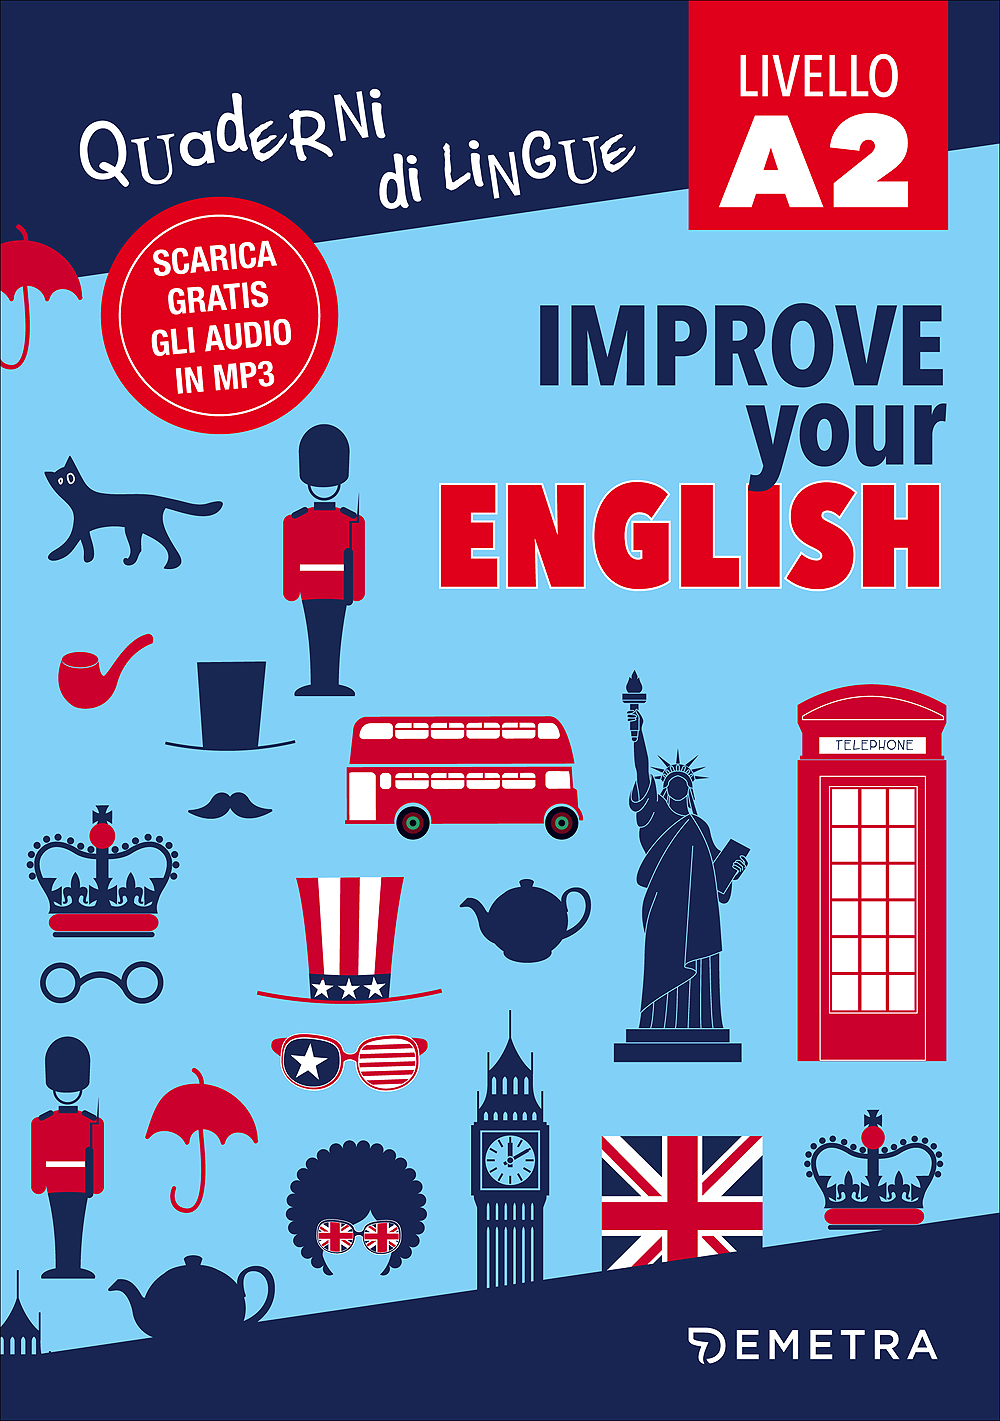 Improve your English A2